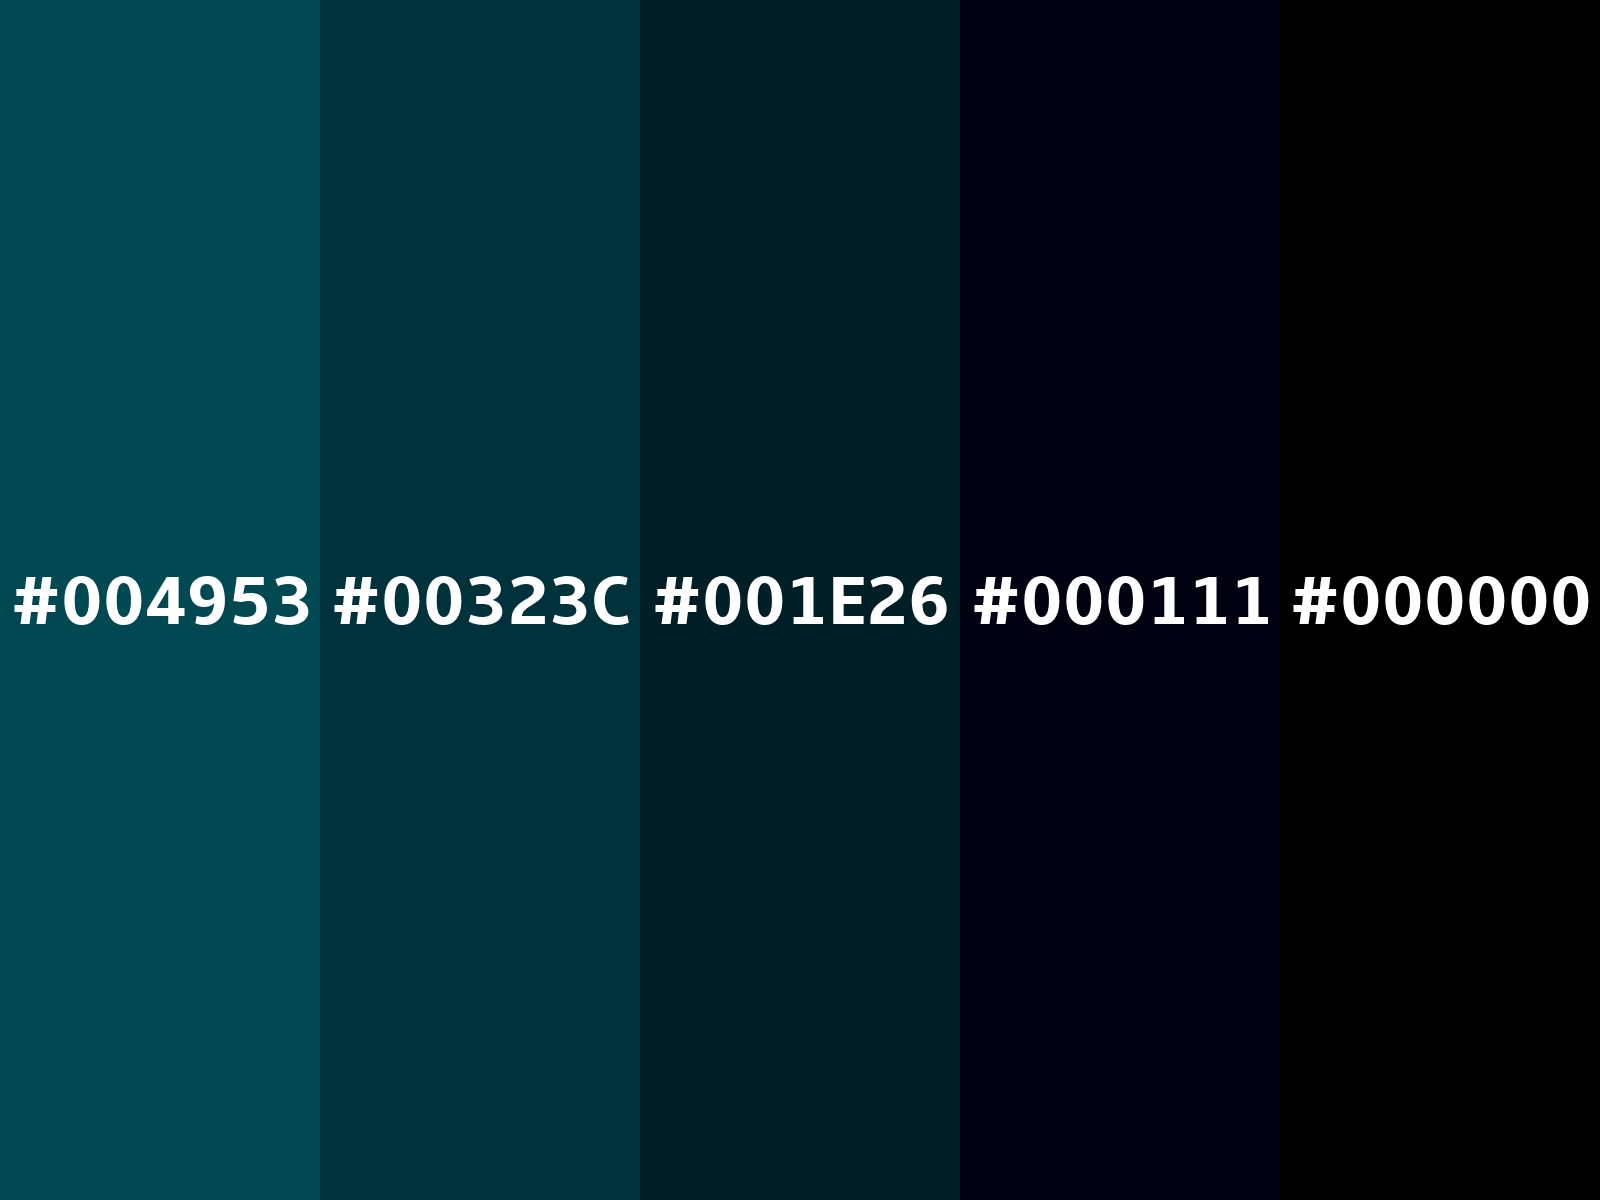 Converting Colors - Midnight green (eagle green)